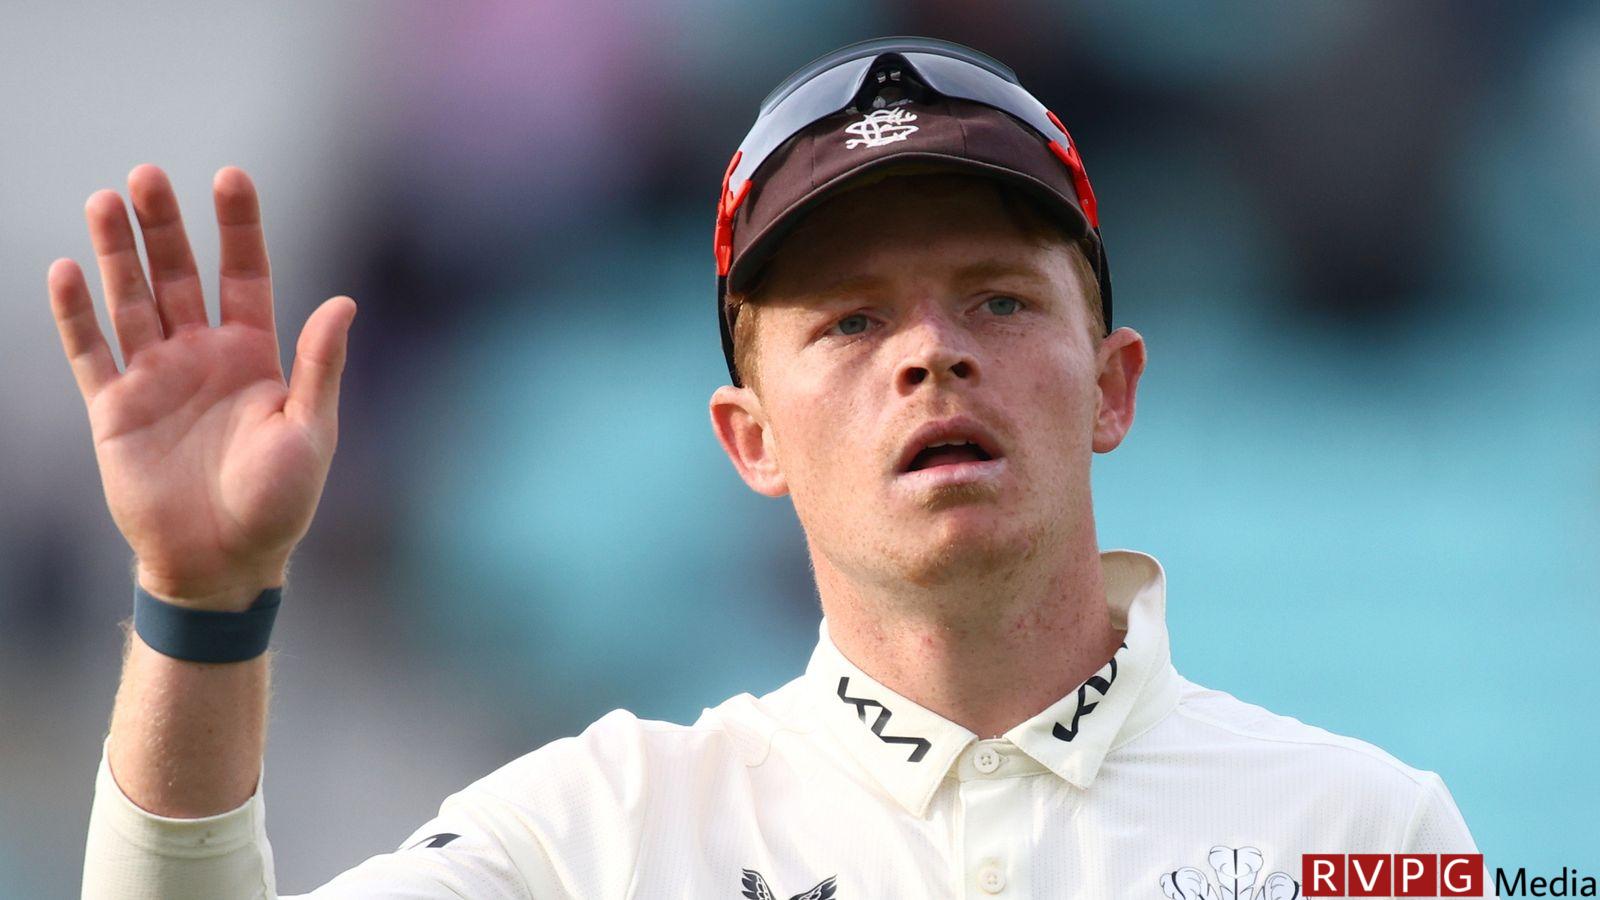 County Championship: Surrey beats Hampshire at Kia Oval as weather results in draw